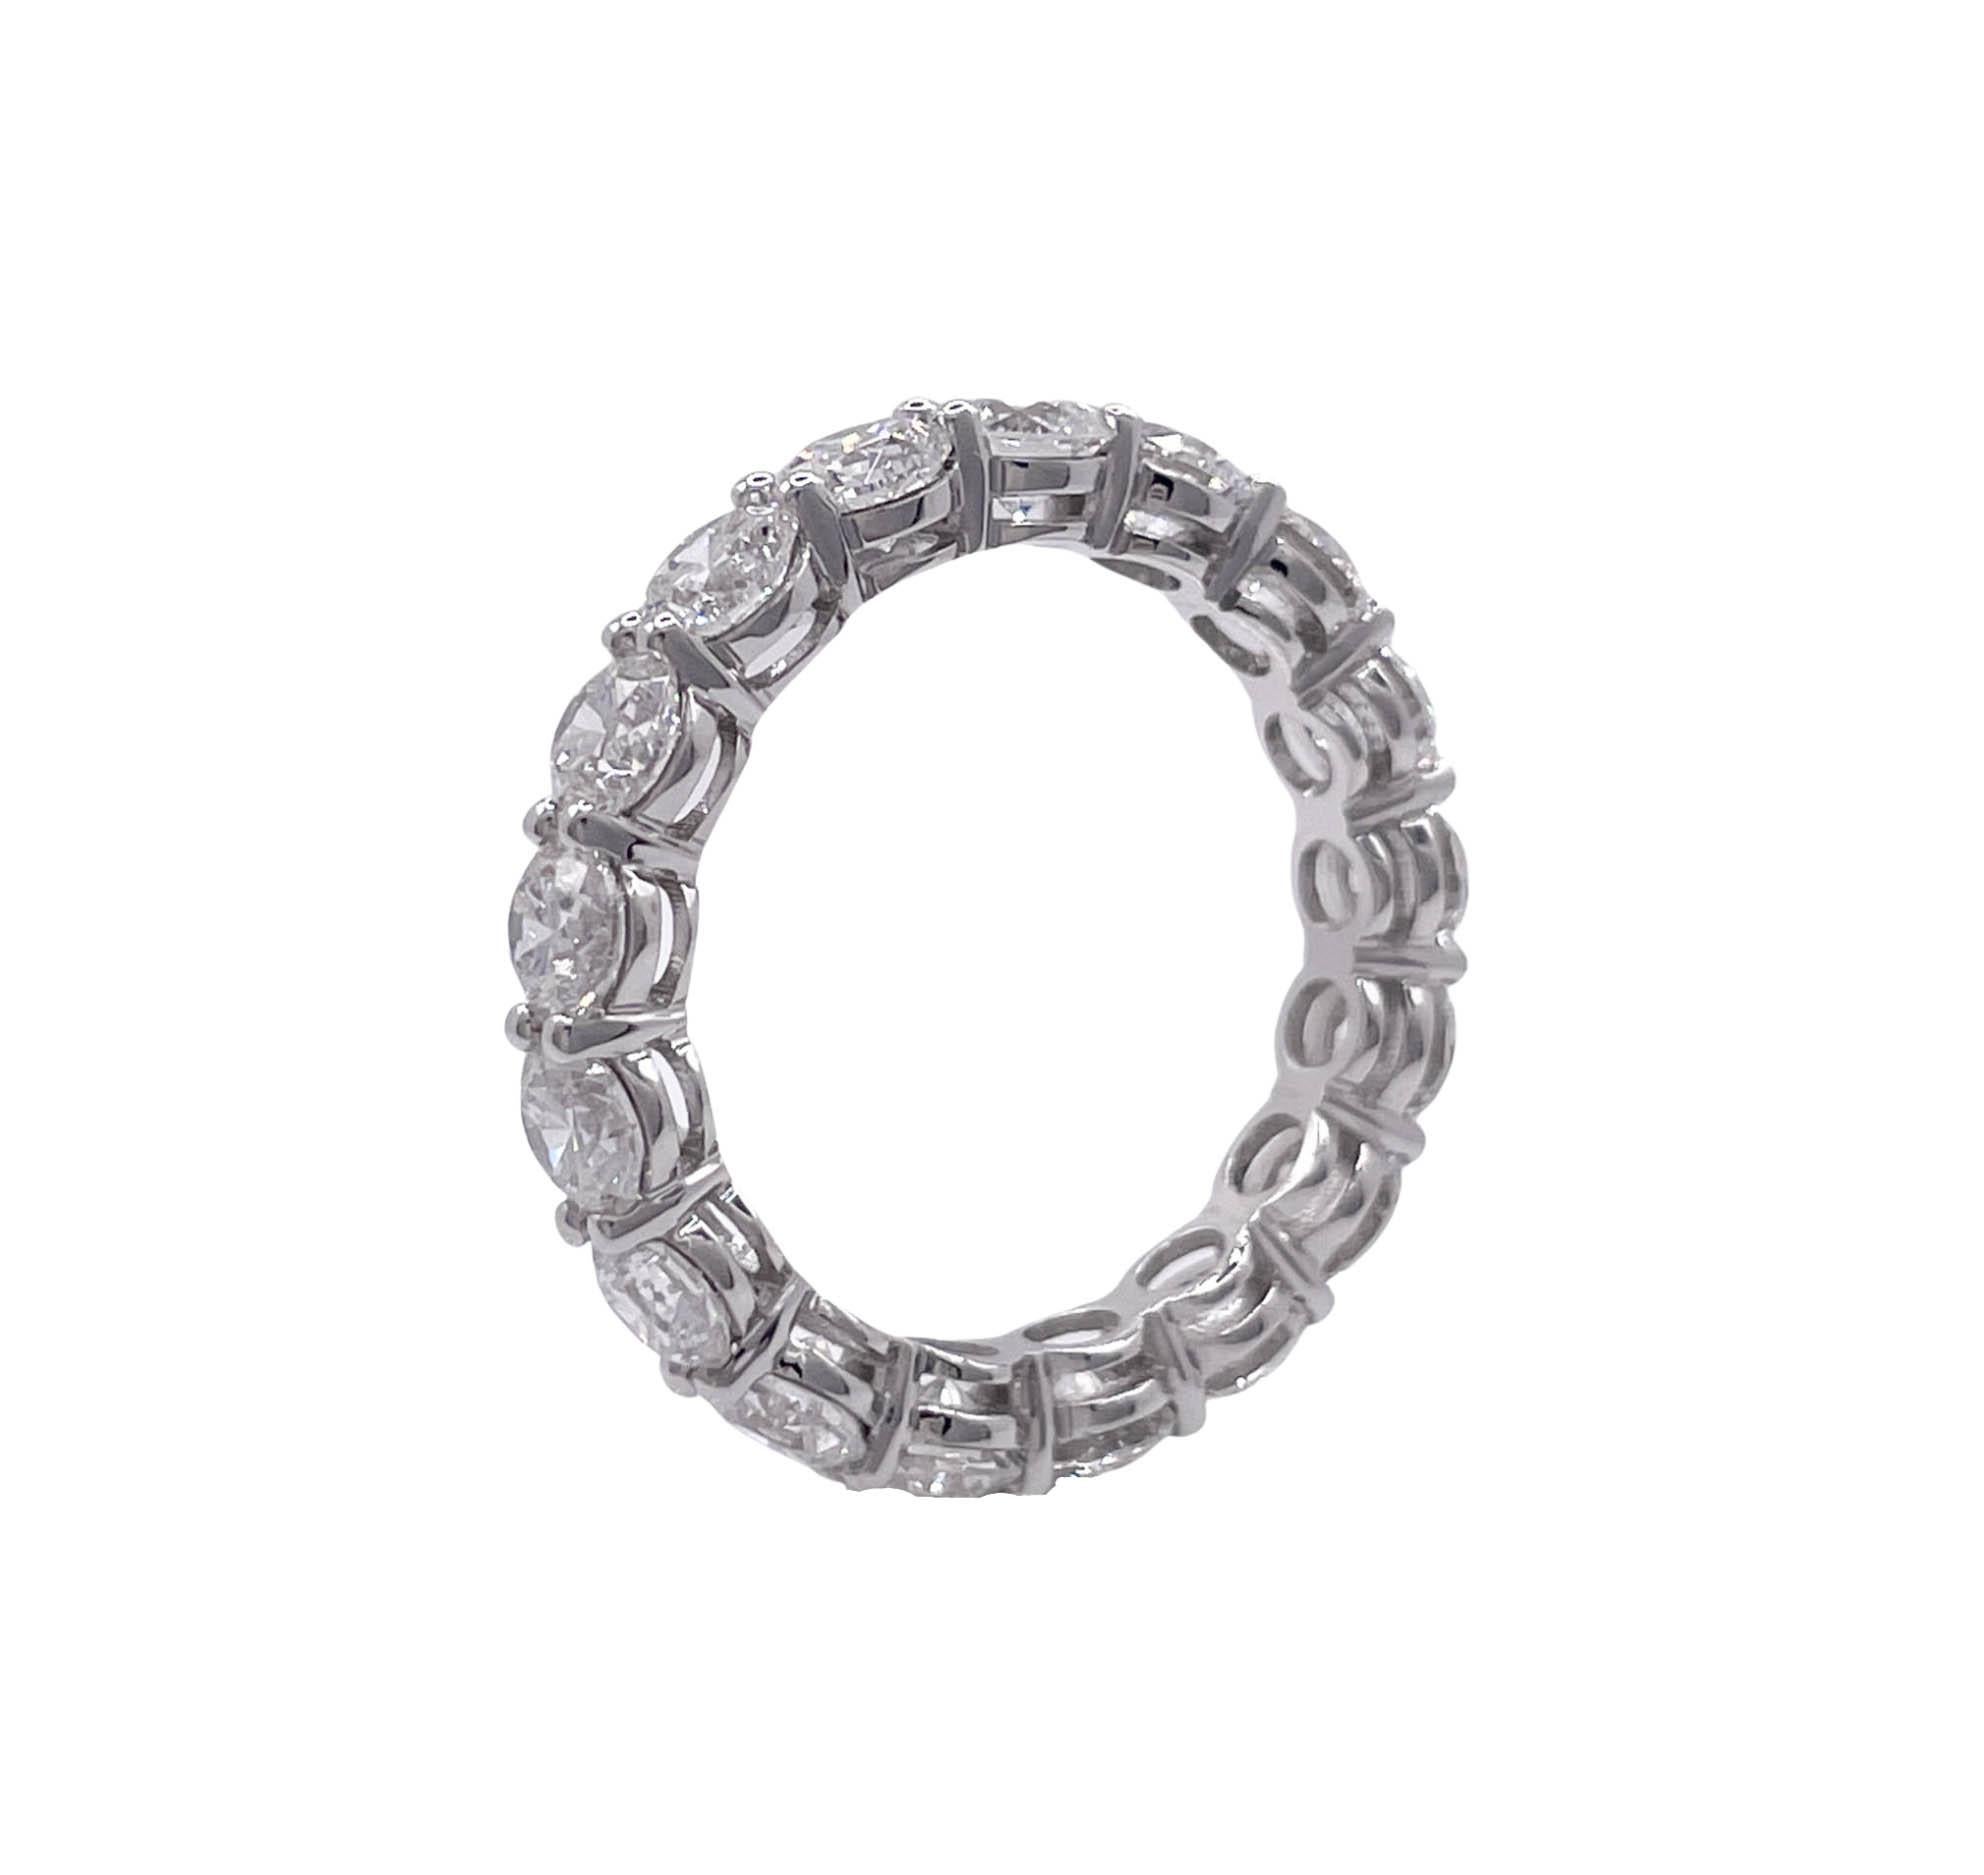 Jay Feder 14k White Gold Round Diamond Eternity Band Ring In Good Condition For Sale In Boca Raton, FL